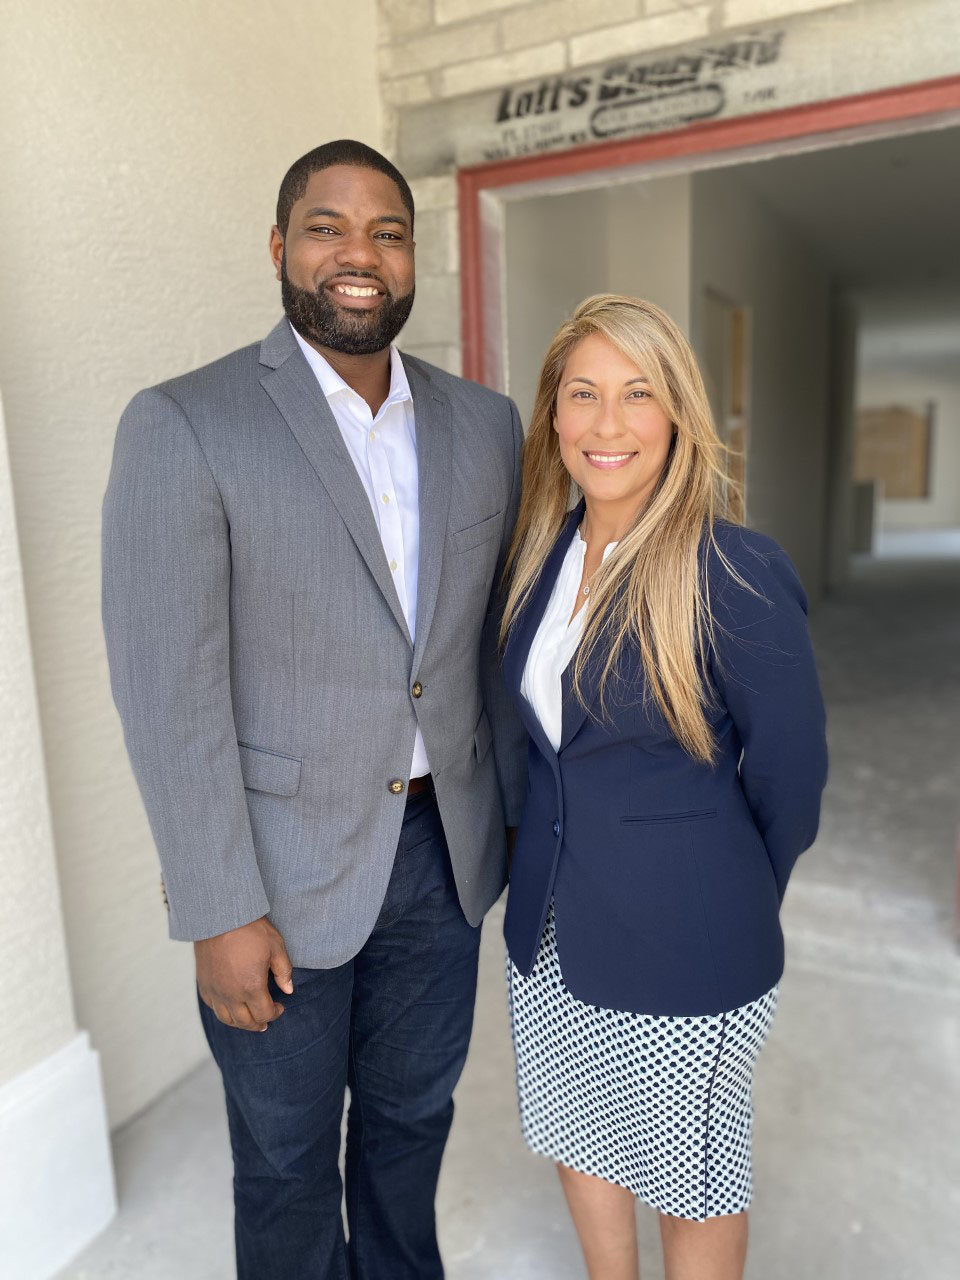 Representative Byron Donalds toured the Career Pathways Learning Lab subdivision with The Immokalee Foundation’s president and CEO Noemi Y. Perez.